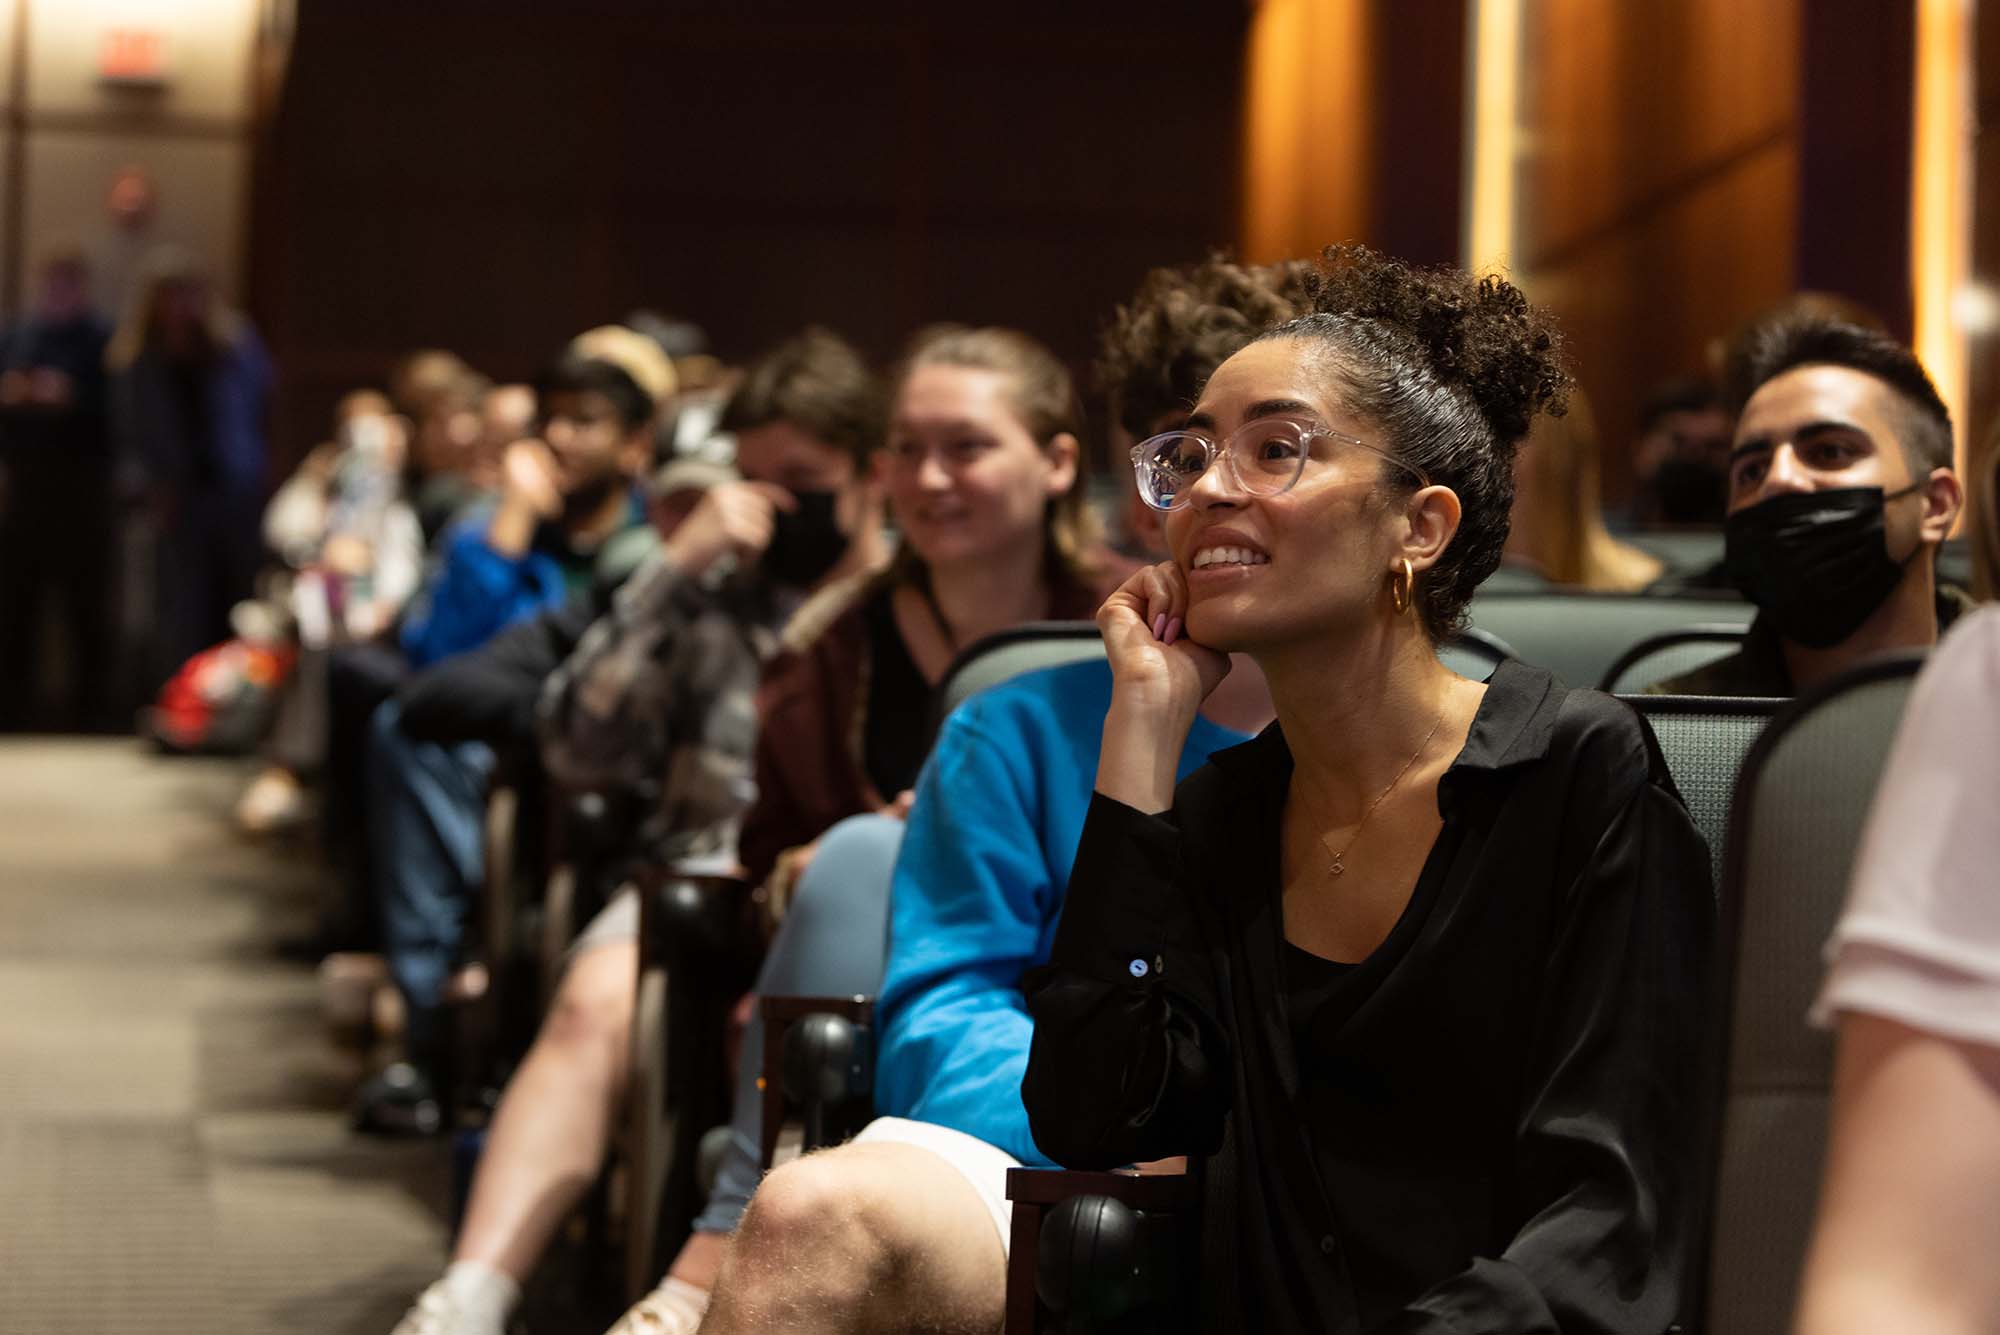 An audience member in the Questrom auditorium looks toward the stage during Ortiz's Q&A. The young woman Black has glasses, wears Black, and rests her hand on her chin as she listens. The auditorium rows behind her a filled.